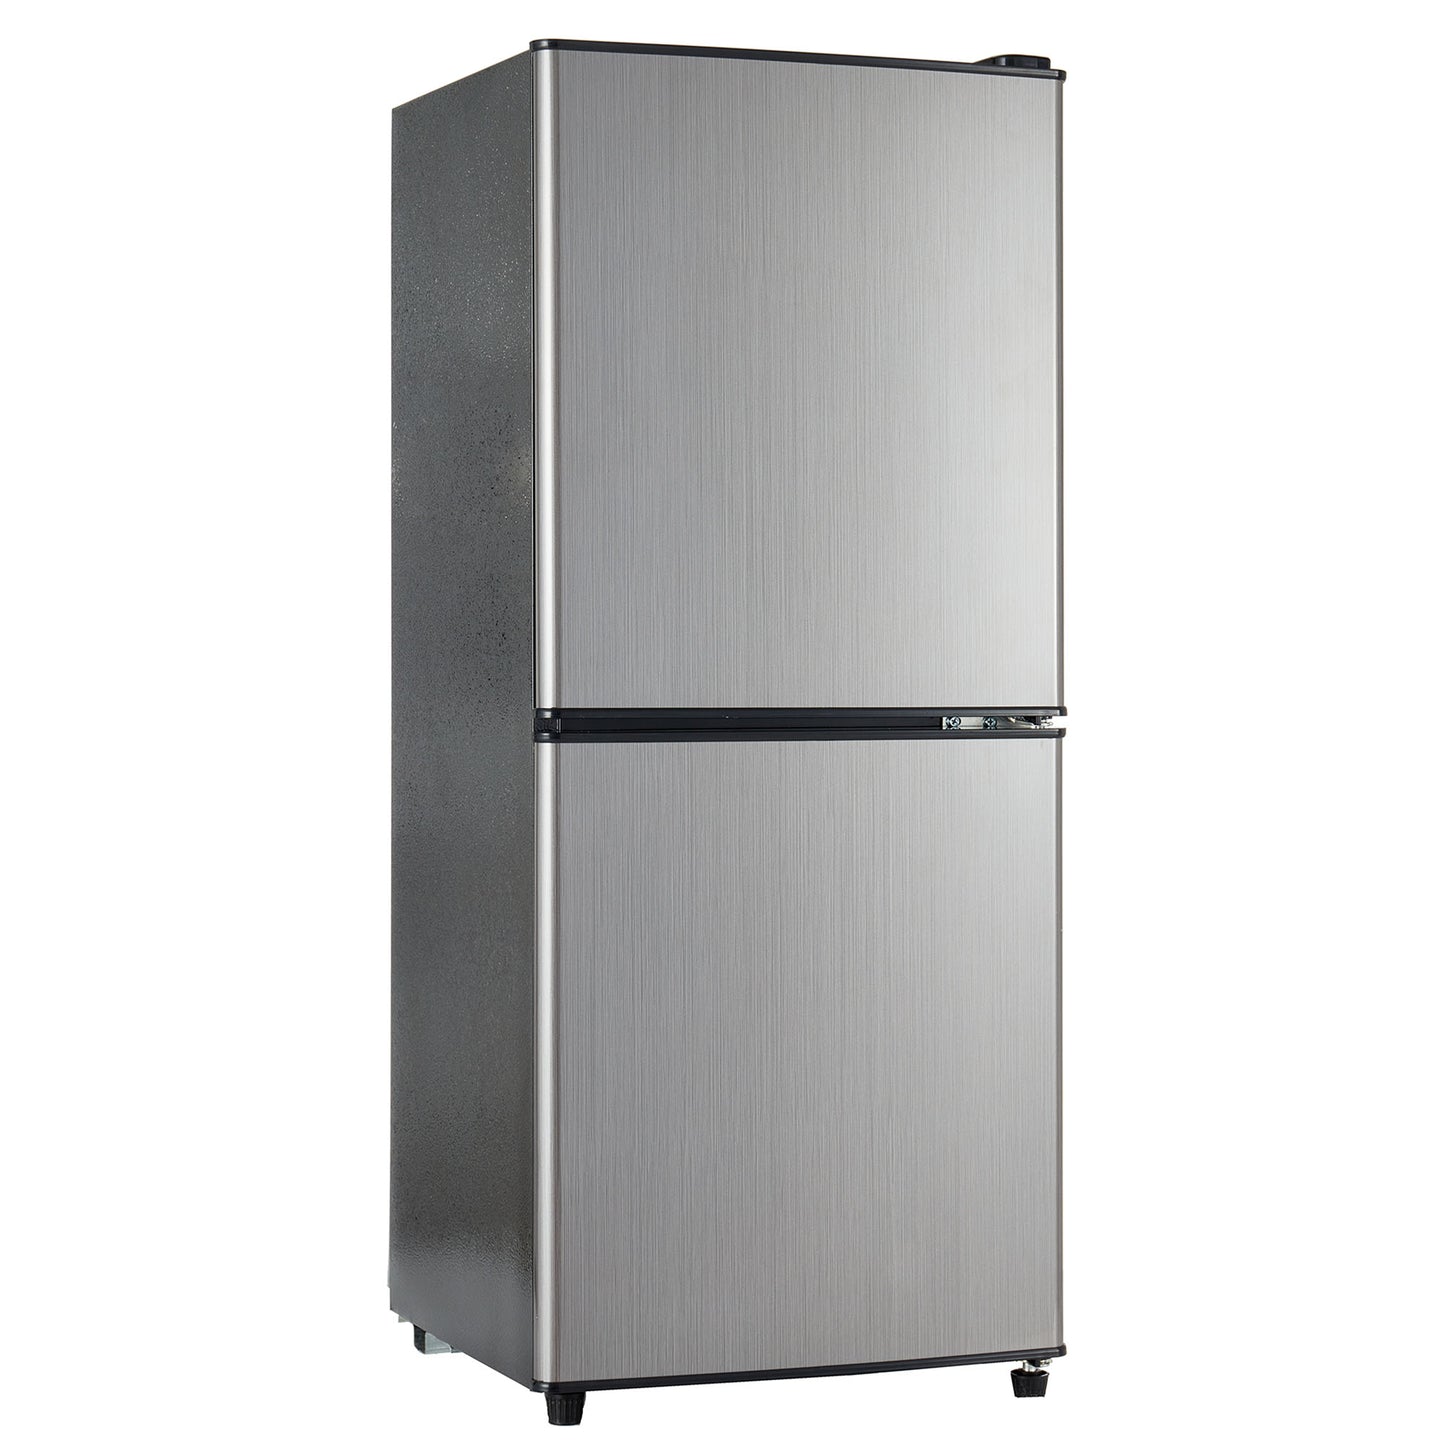 Dual Zone Refrigerator, 2.2+1.4Cu.Ft 4 Star Freezer, 7 Temperature Settings, 45 dB, Brushed Gray Silver, LED Lighting